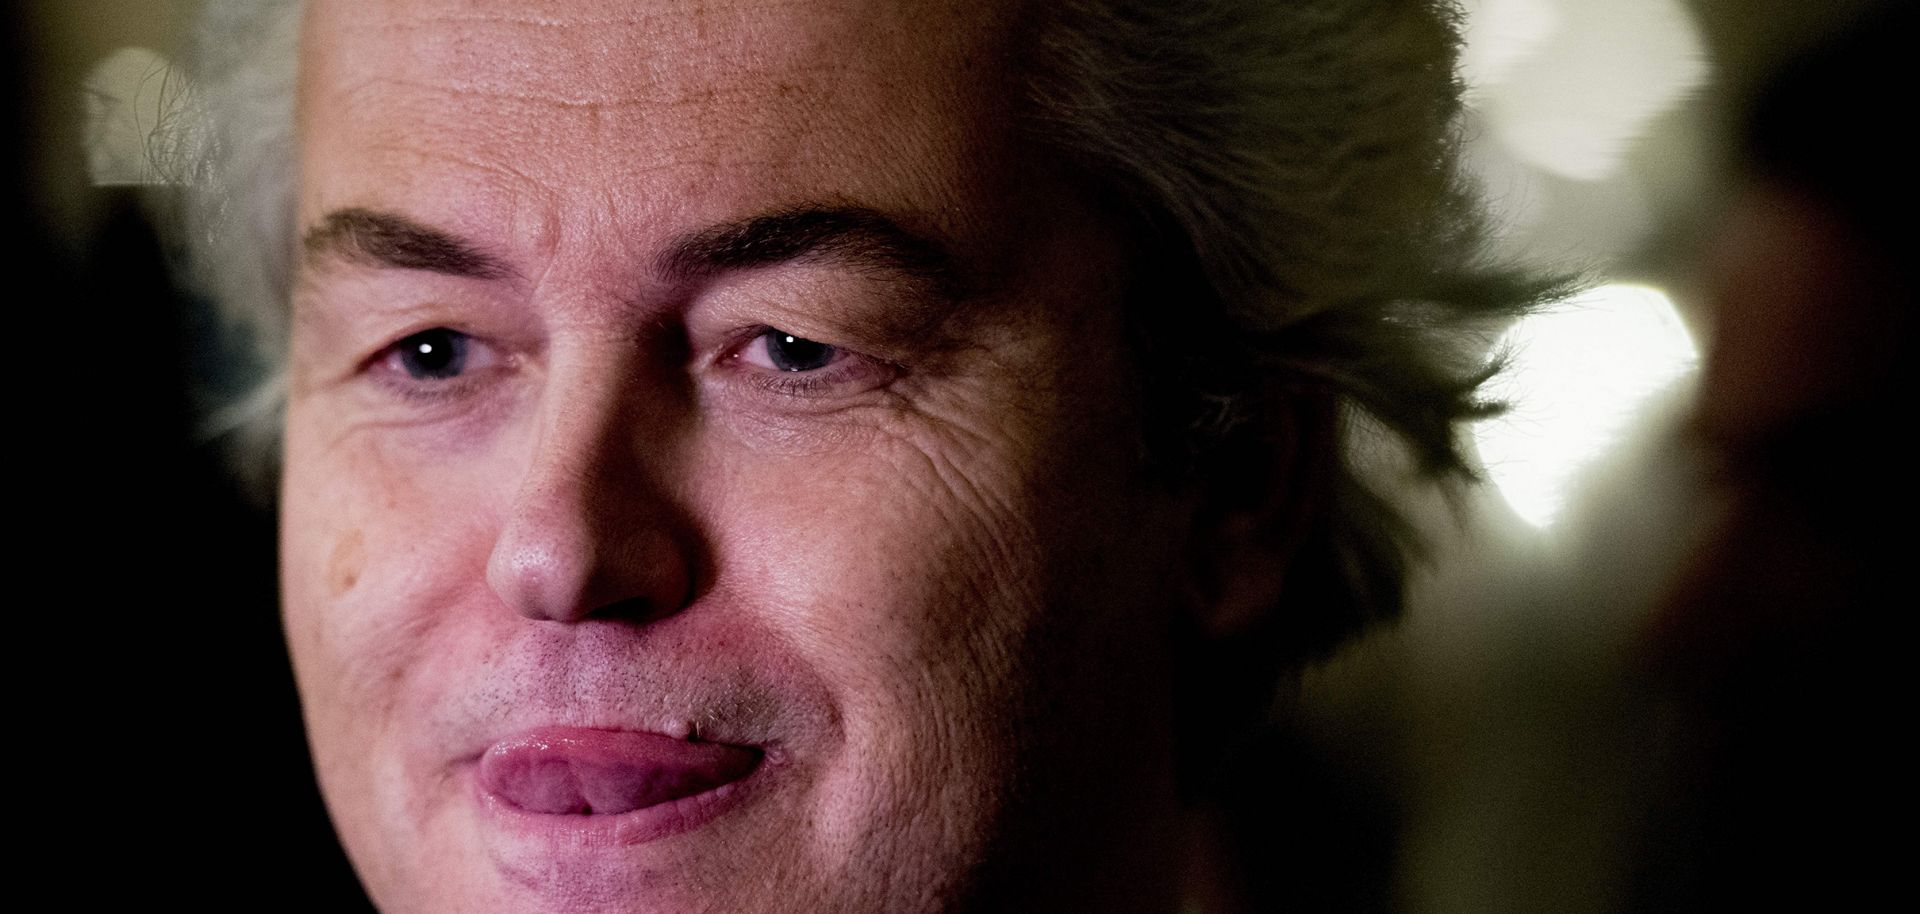 The fact that Geert Wilders' Party for Freedom did not perform as strongly as expected in Dutch elections may have stolen some momentum from Euroskeptics, but the issues that are driving discontent with mainstream European parties remain.